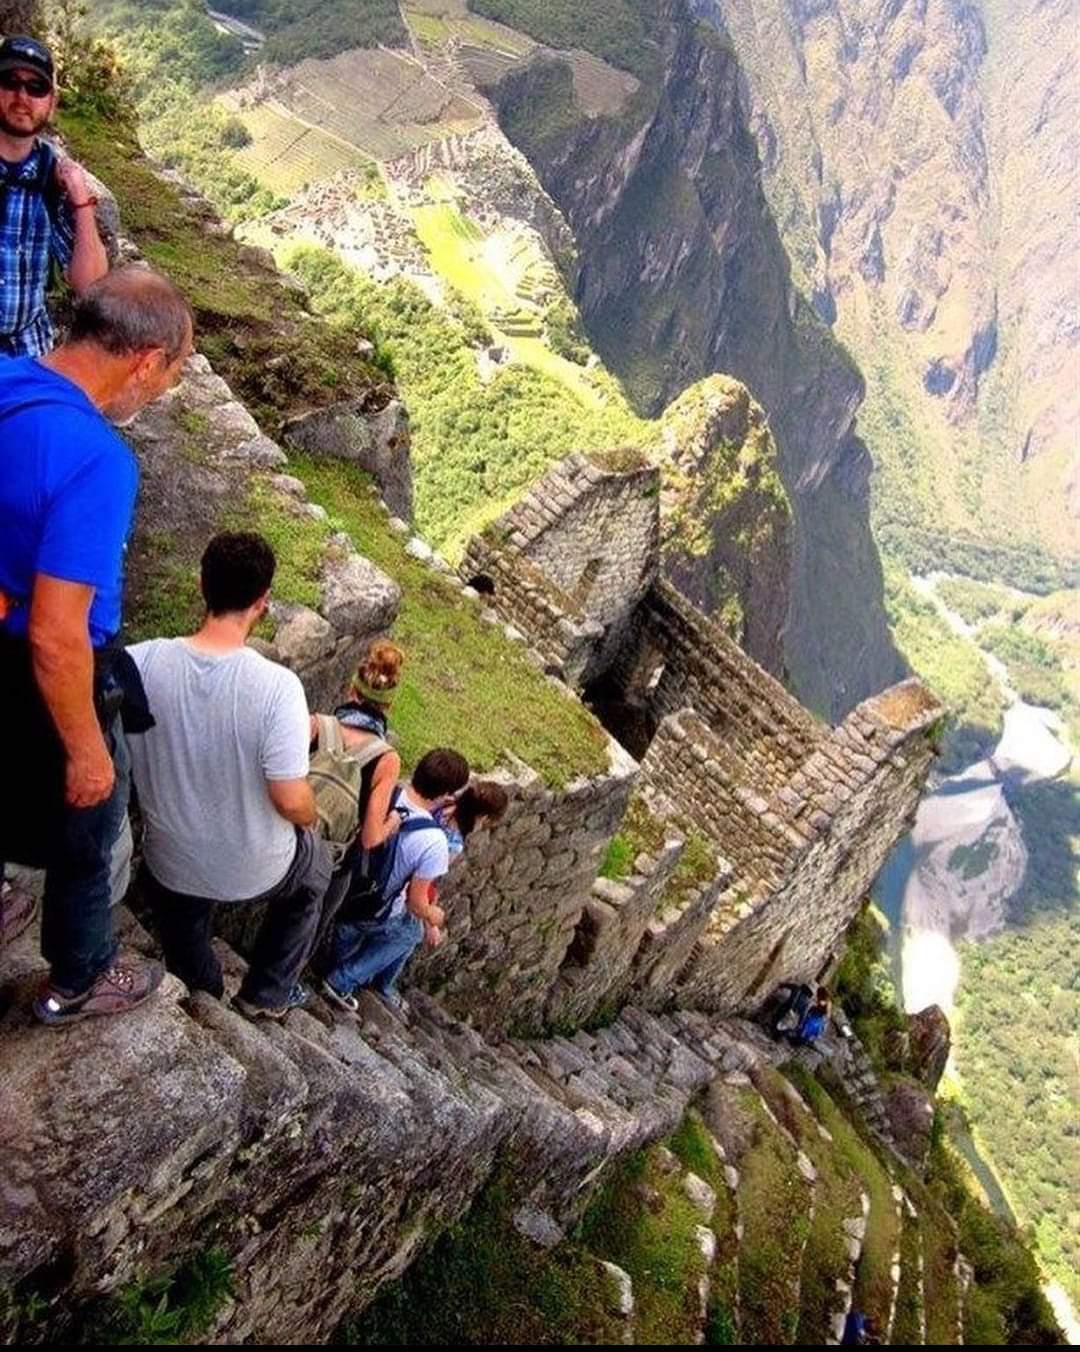 This death staircases in Machu Picchu; Peru, is 500 years old and was built by the Incas to reach the Temple of the Moon.